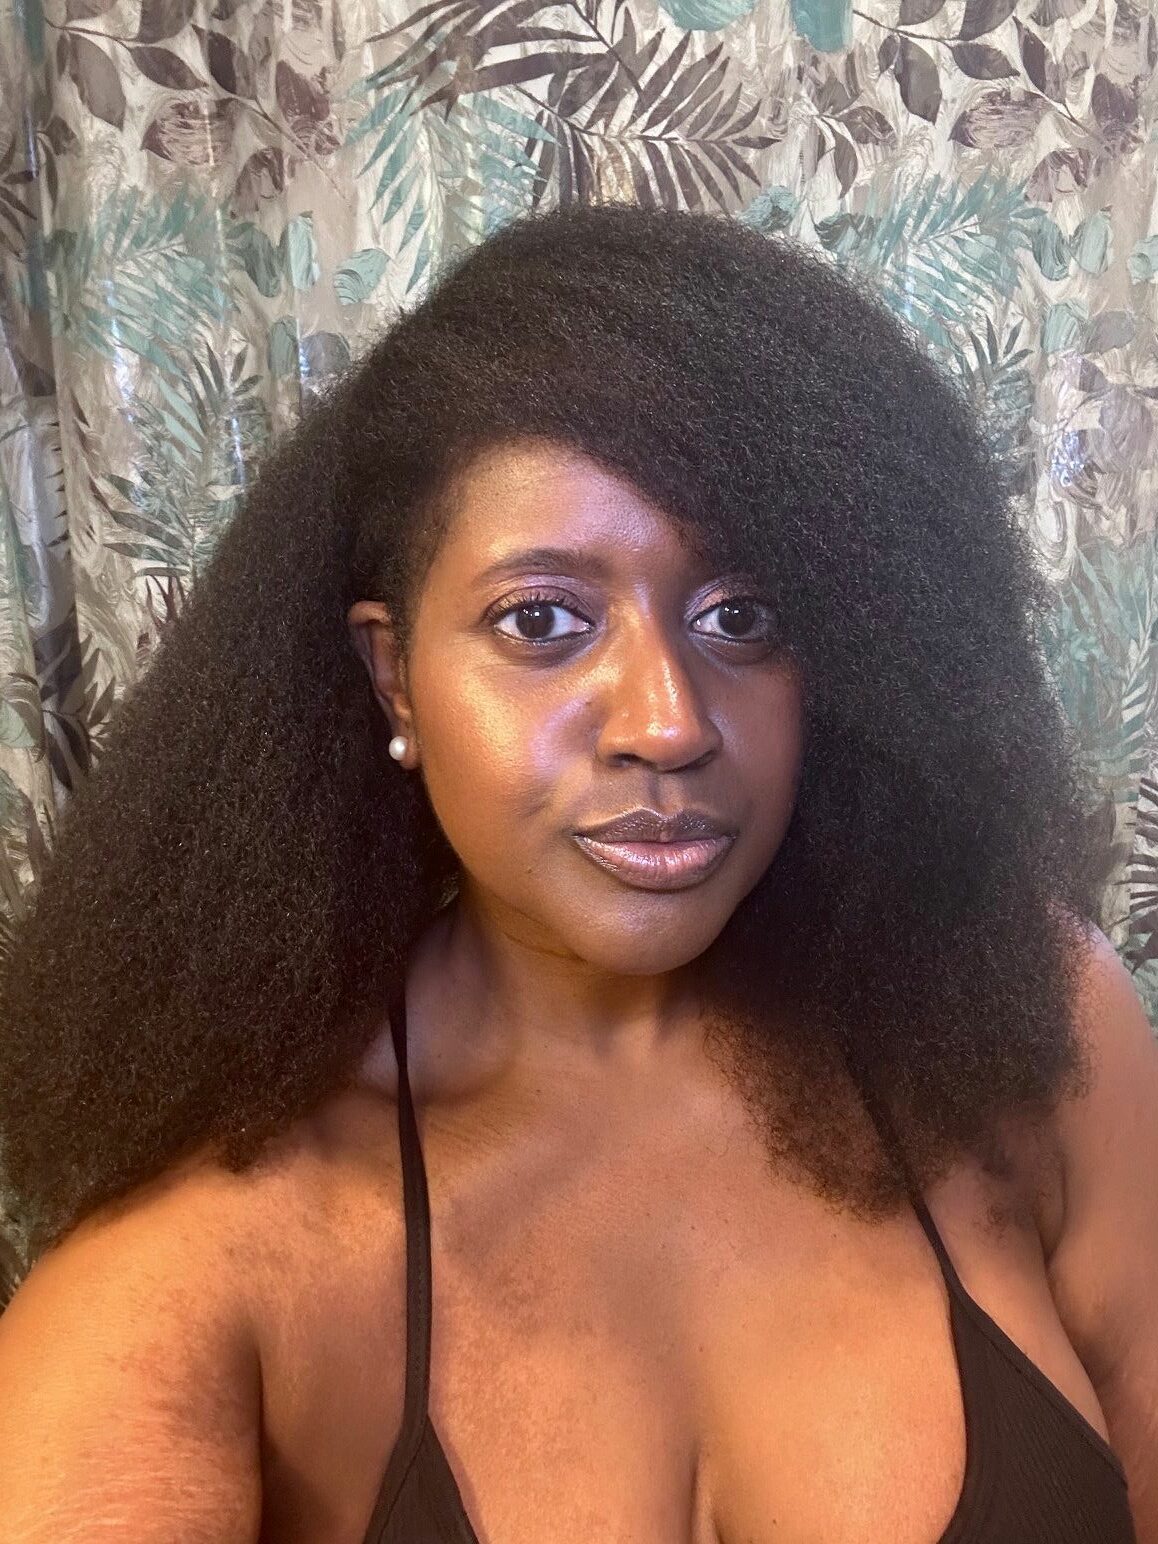 An image of lifestyle blogger Ariel with her natural hair.